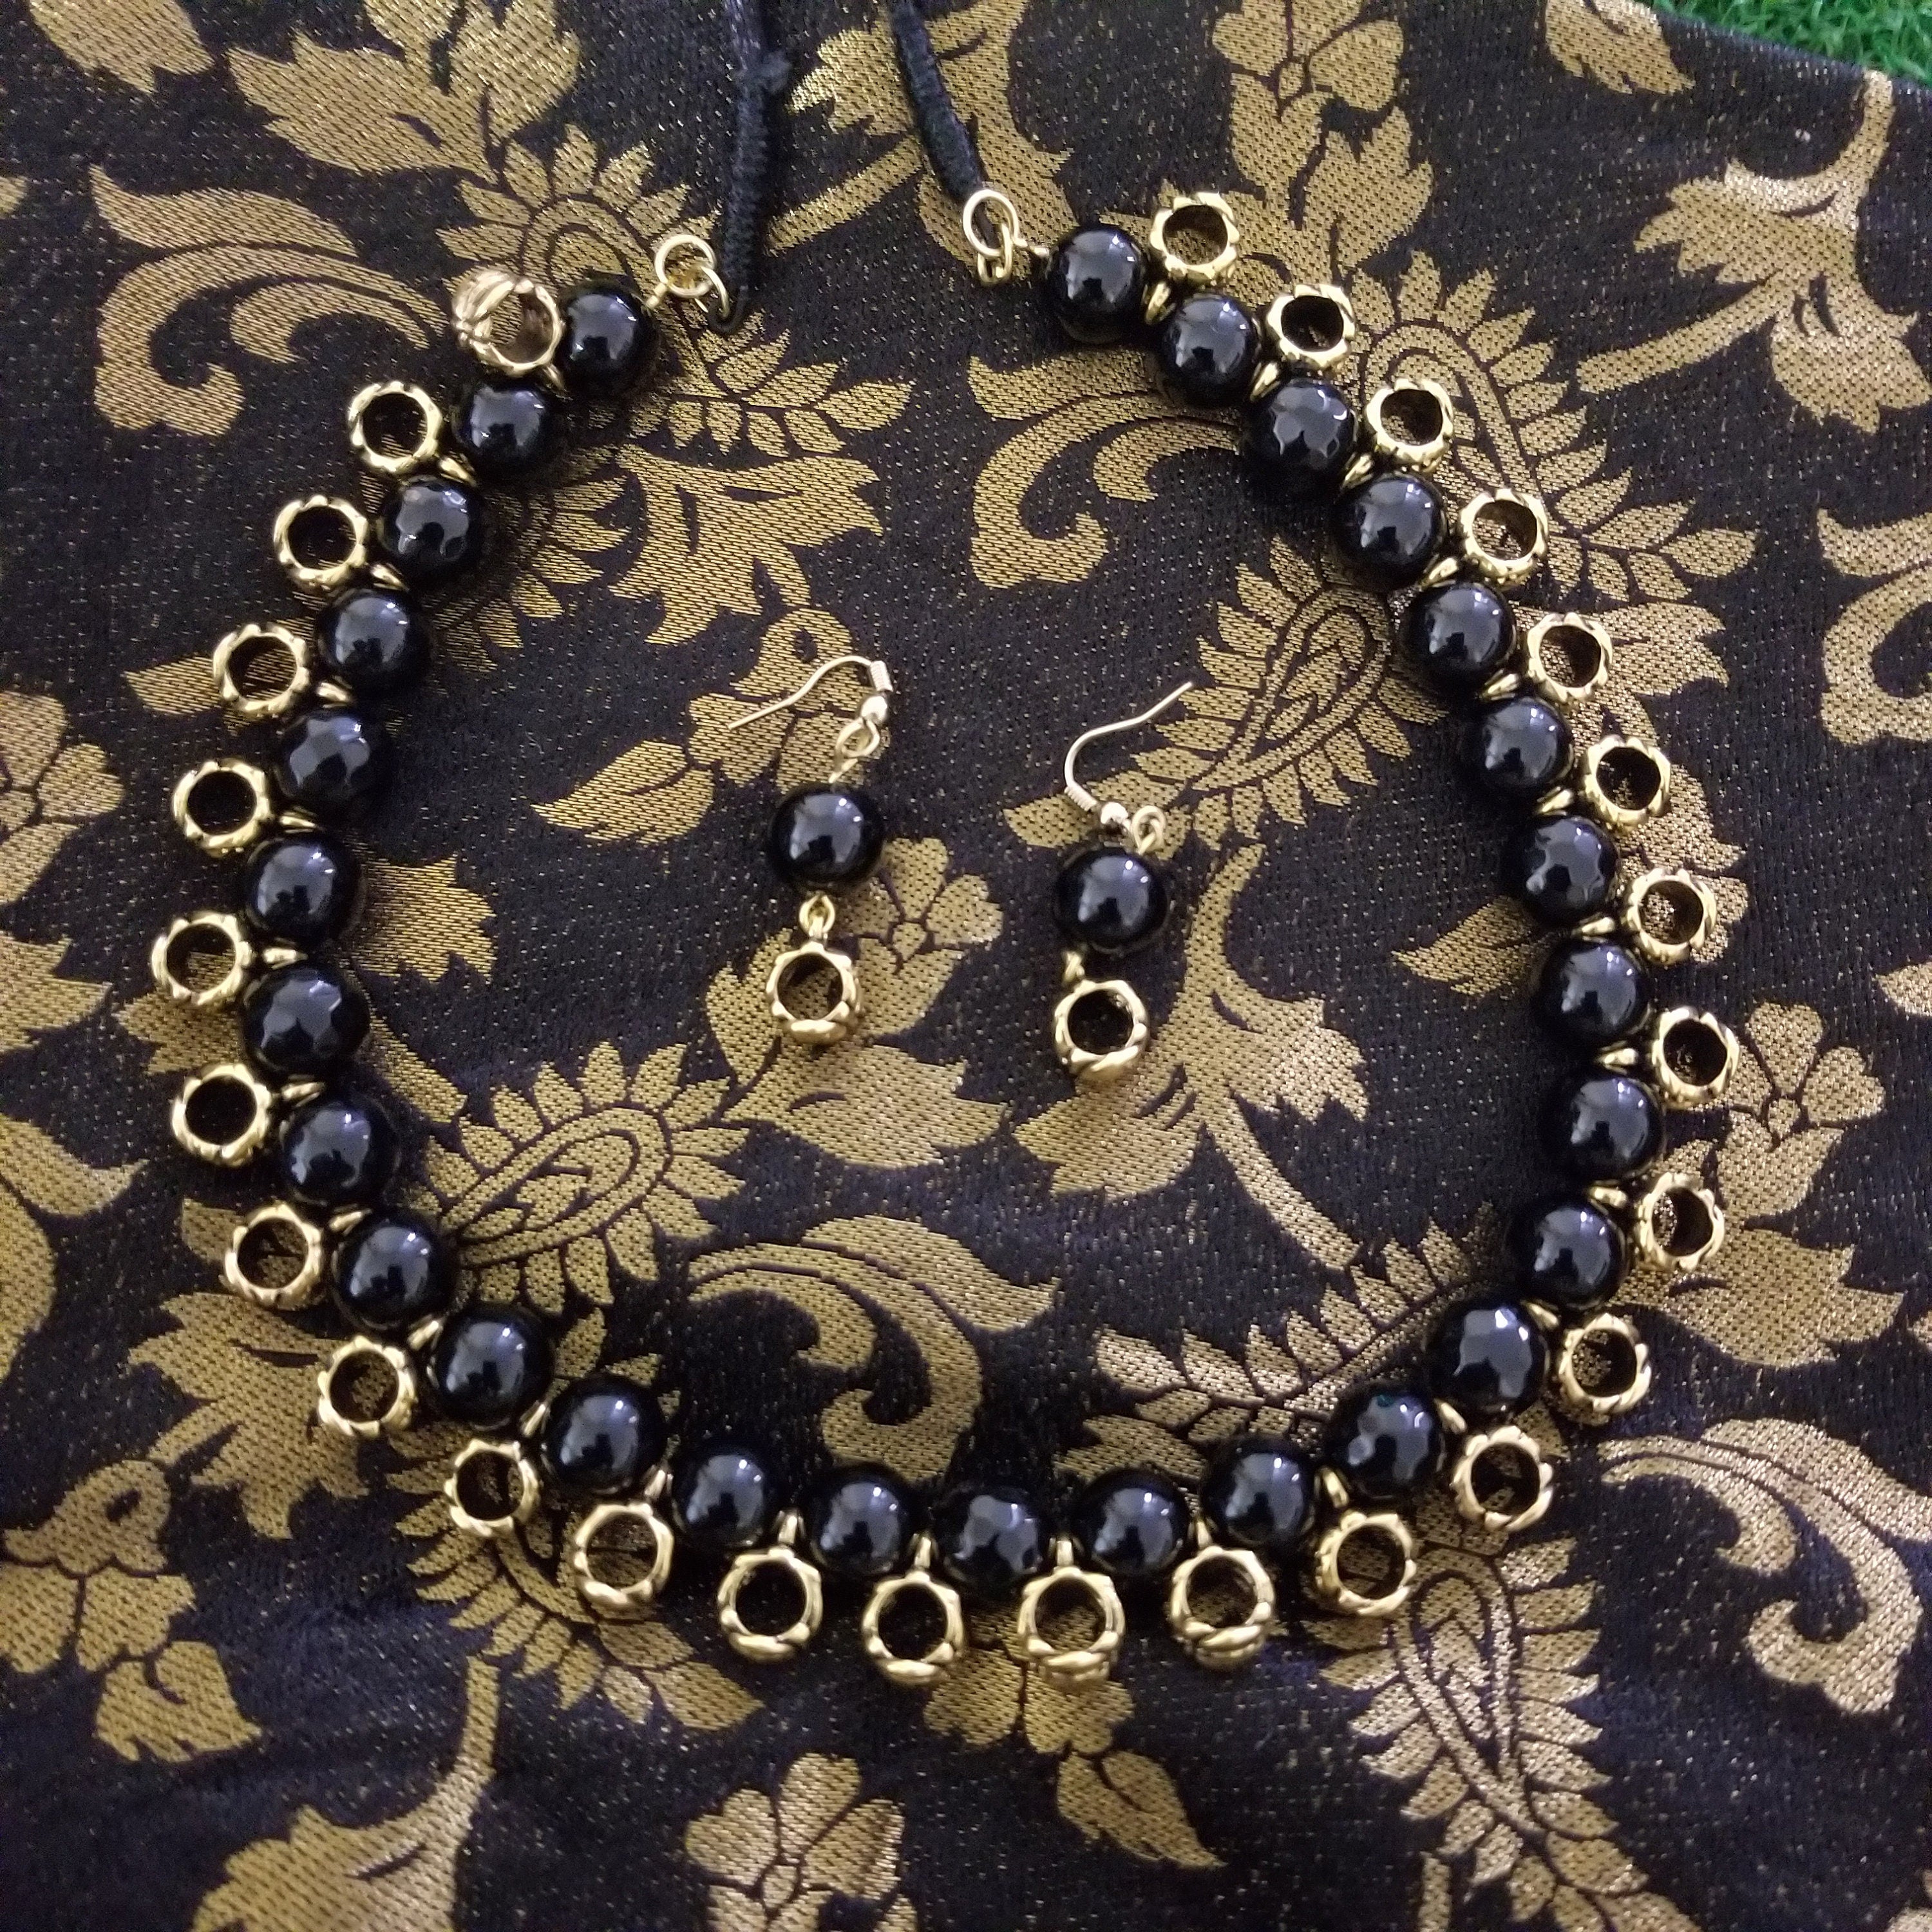 Black bead with Antique bead Necklace